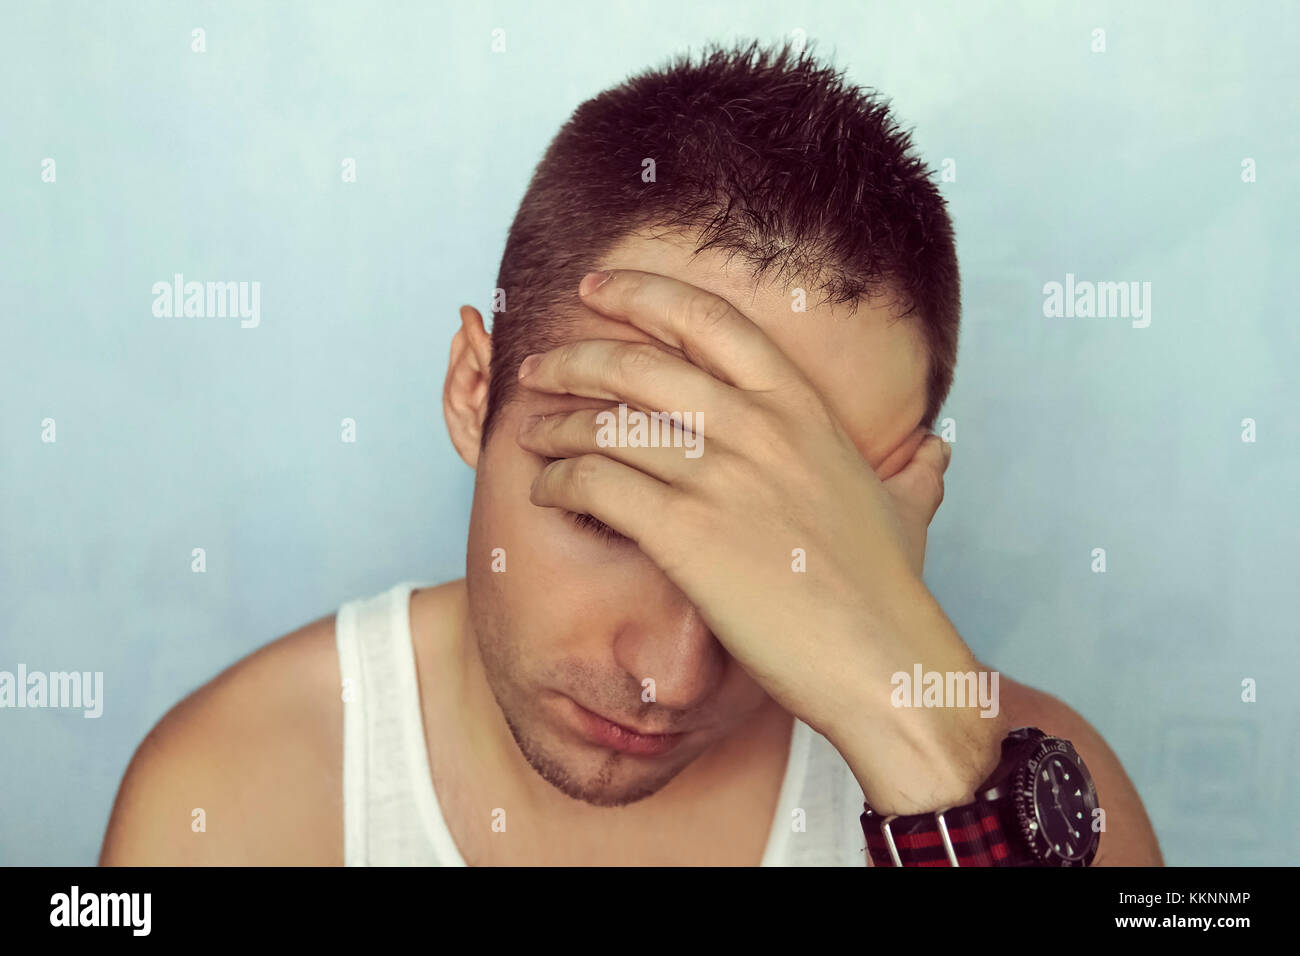 Young man squeezes his forehead, covering his face. Severe headaches or stress from hard work Stock Photo